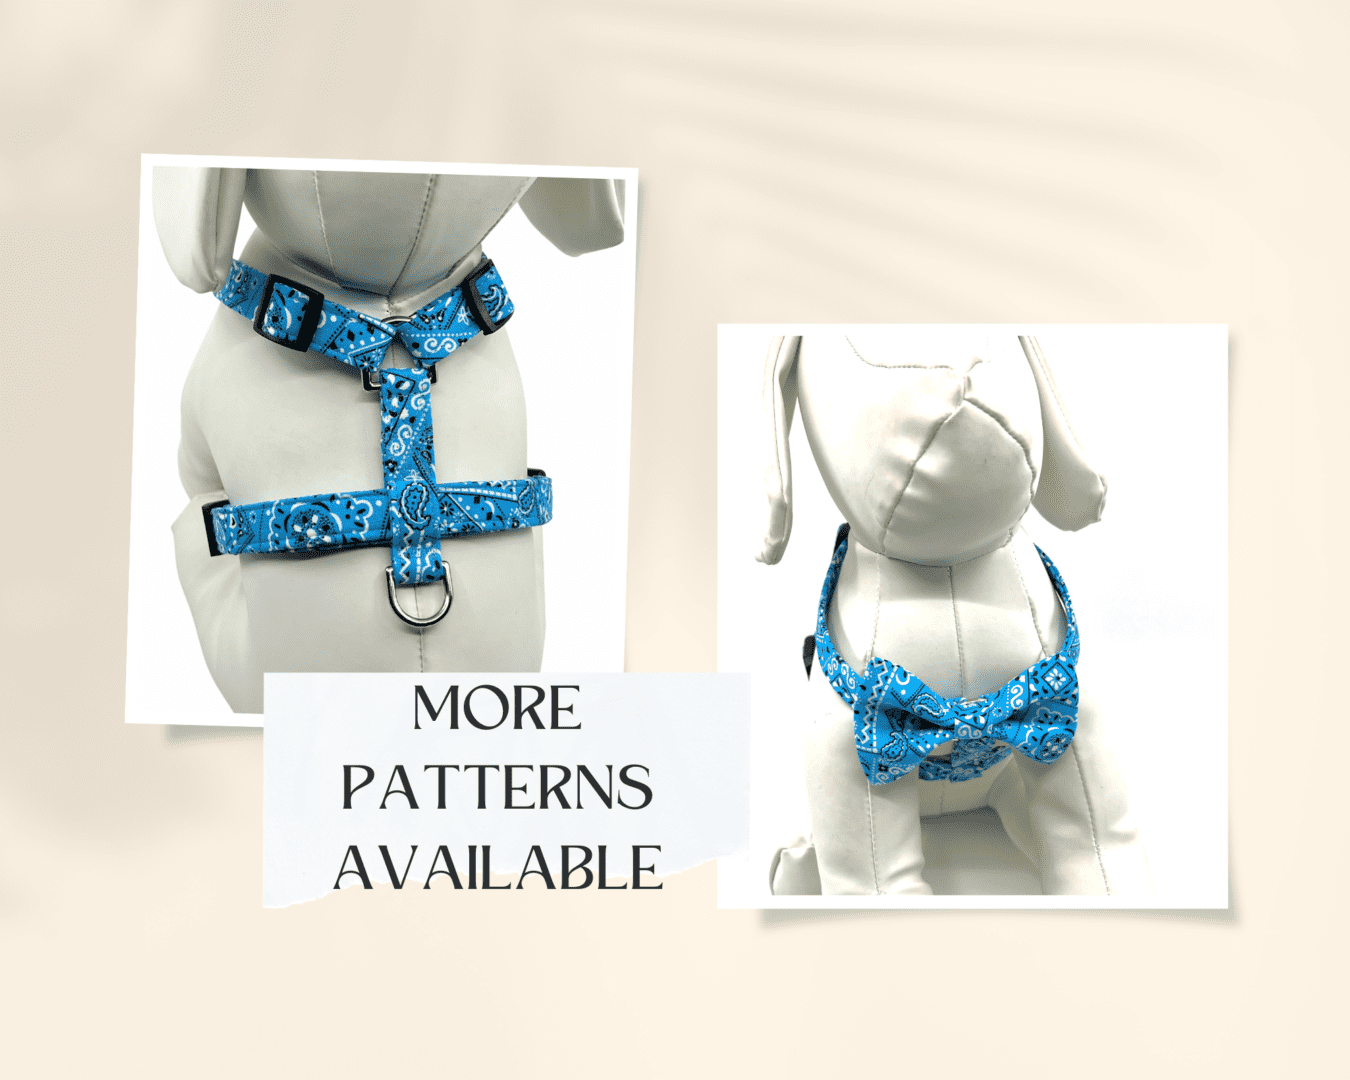 A dog wearing a blue bow tie harness.